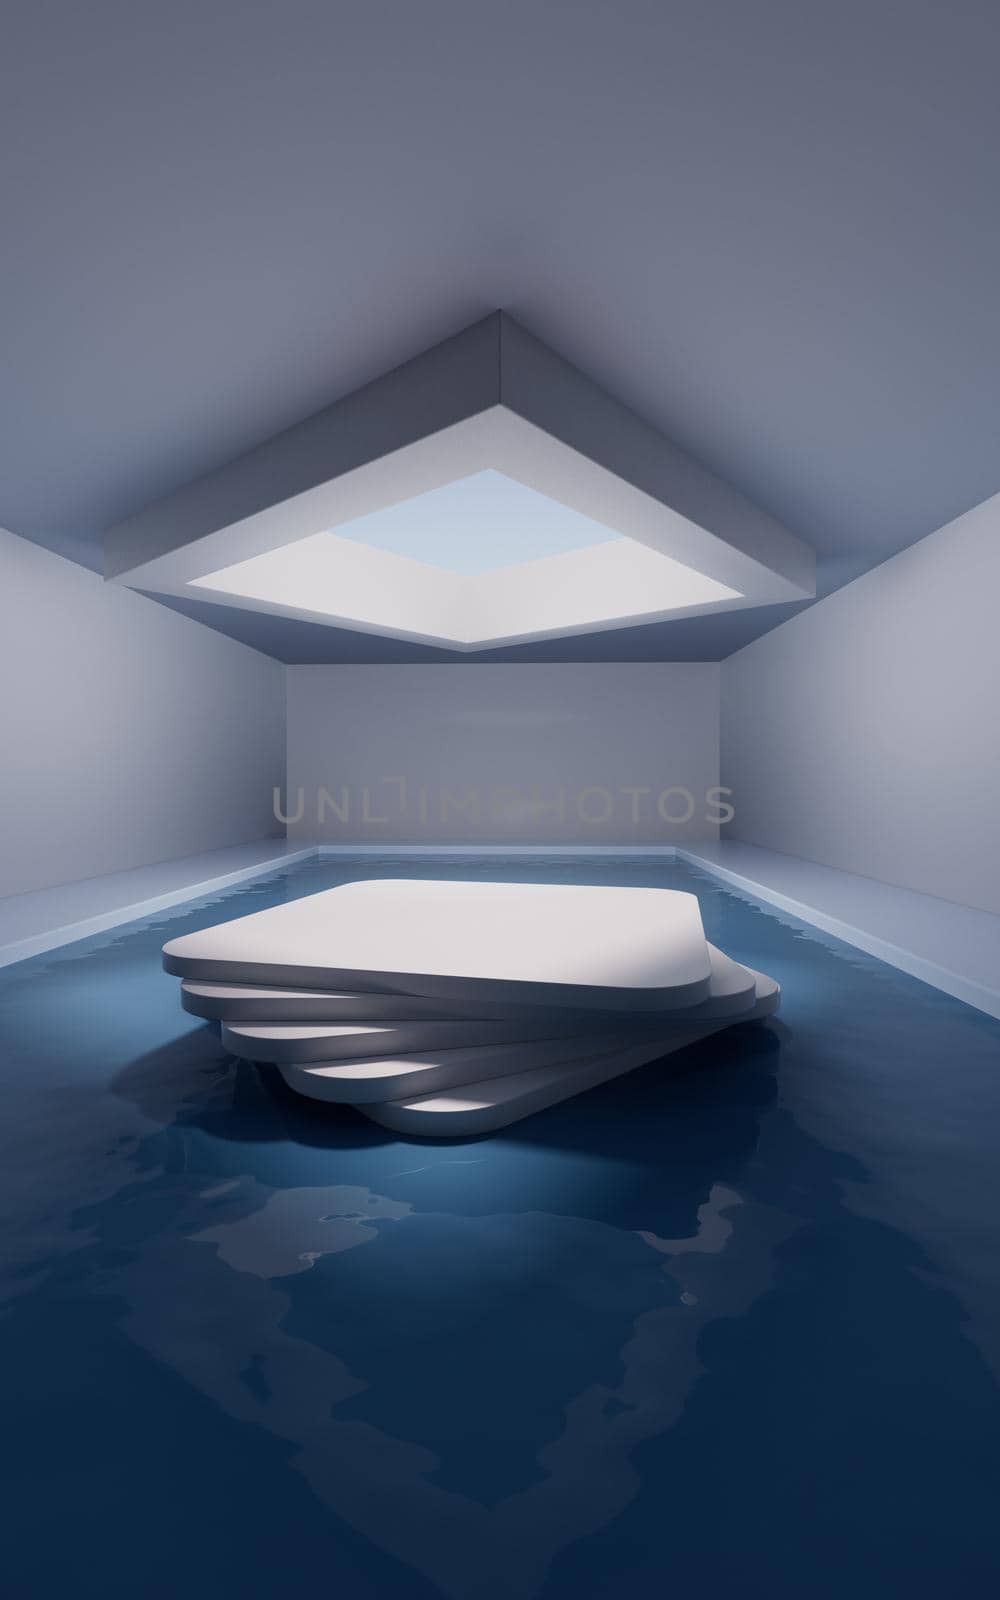 The room with empty stage inside, 3d rendering. by vinkfan